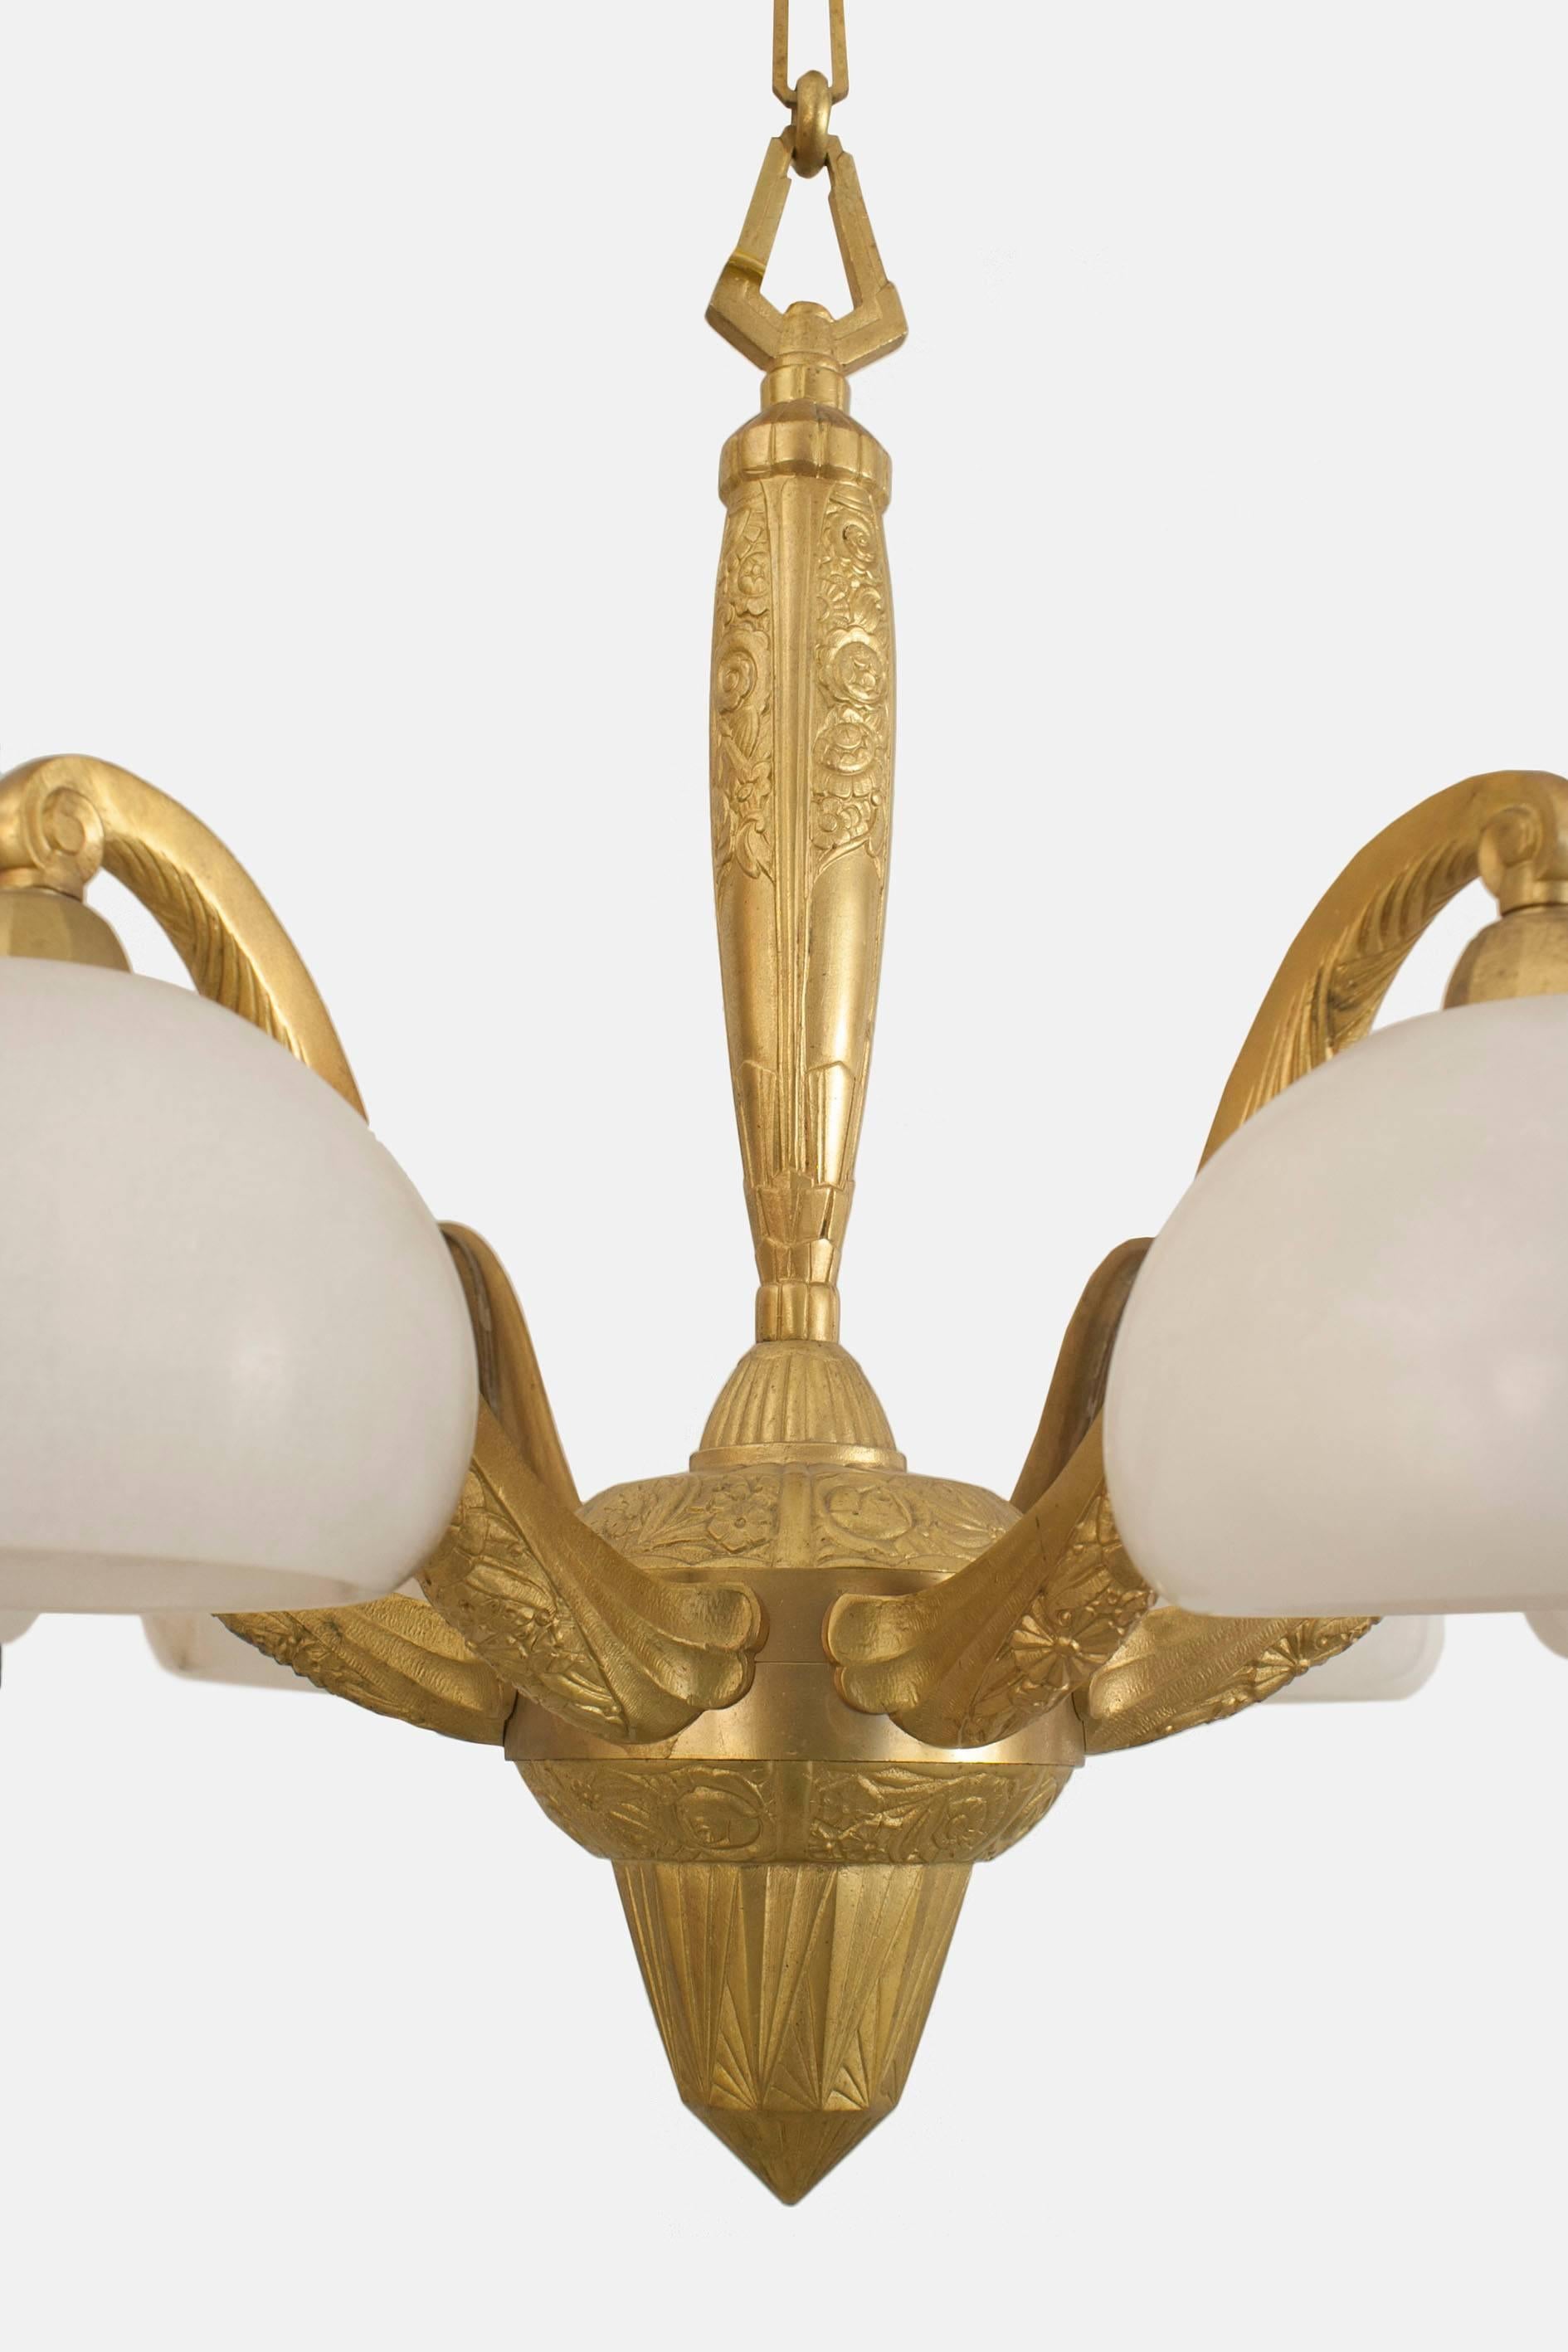 French Art Deco gilt bronze chandelier with a geometric & floral design having 6 scroll arms supporting alabaster bowl shades. (Attributed to SUE ET MARE)
